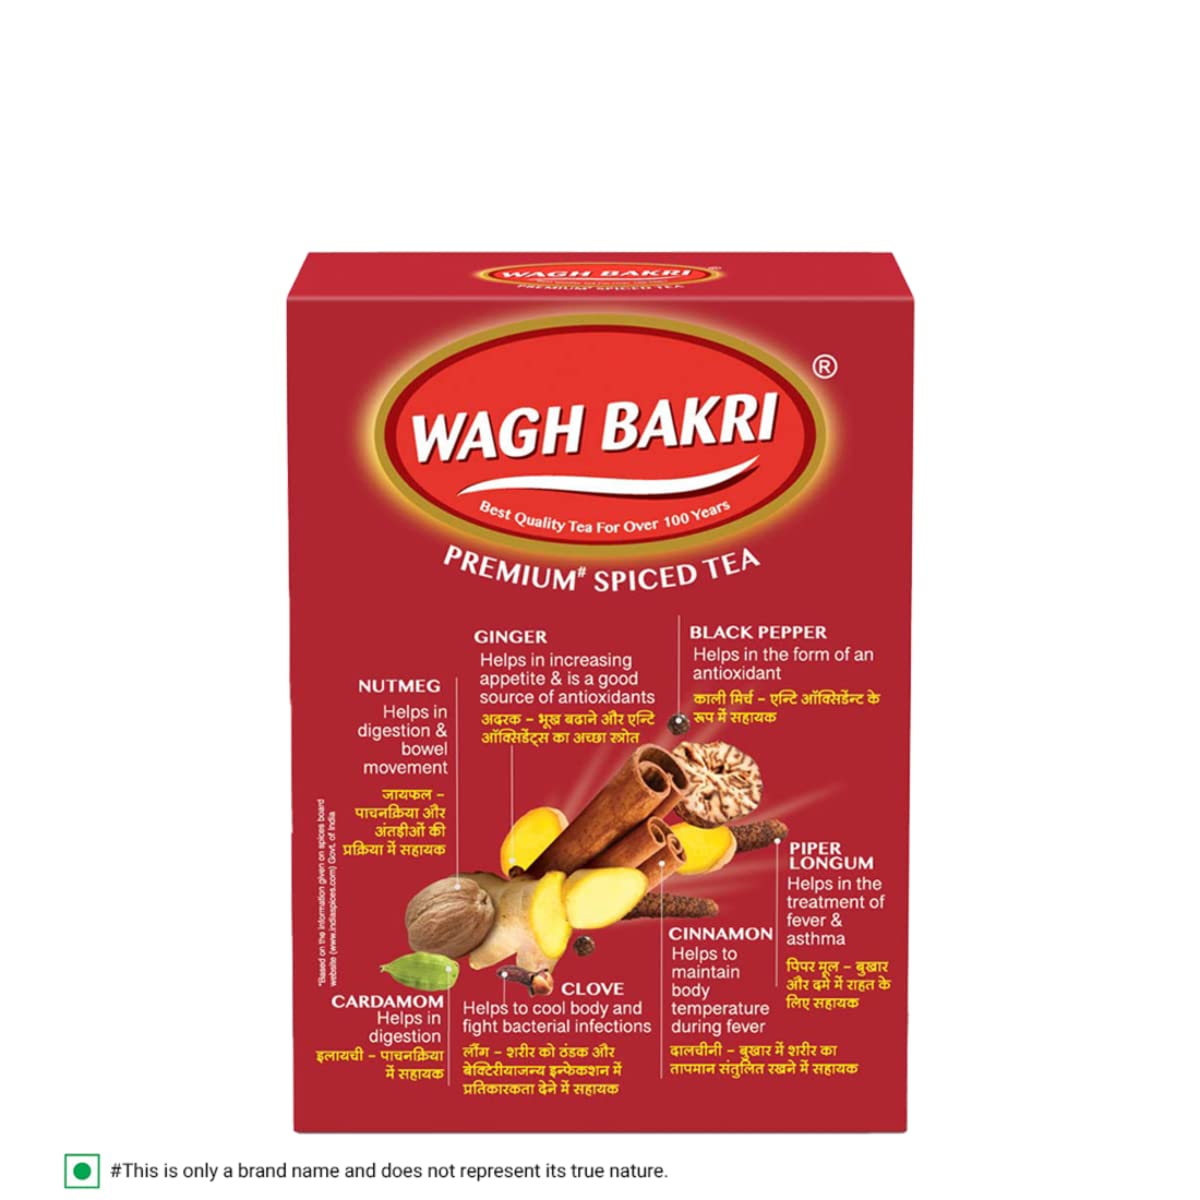 WAGH BAKRI PREMIUM SPICED TEA (WITH 7 REFRESHING SPICES)(250gm)